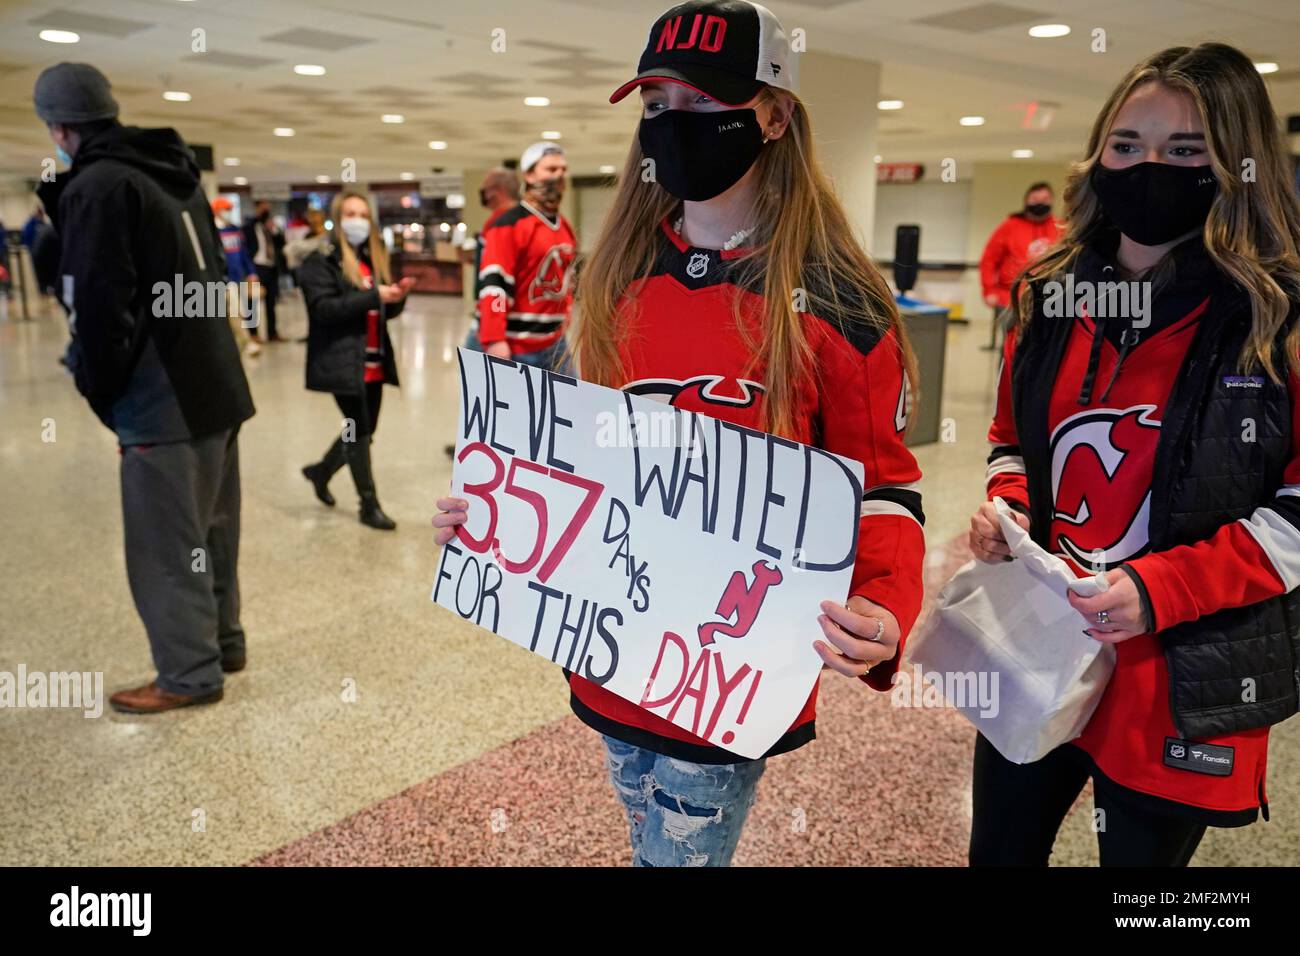 June 02 2012: New Jersey Devils' fans wait in line to enter Game 2 of the  2012 Stanley Cup Finals at the Prudential Center in Newark, New Jersey  between the New Jersey